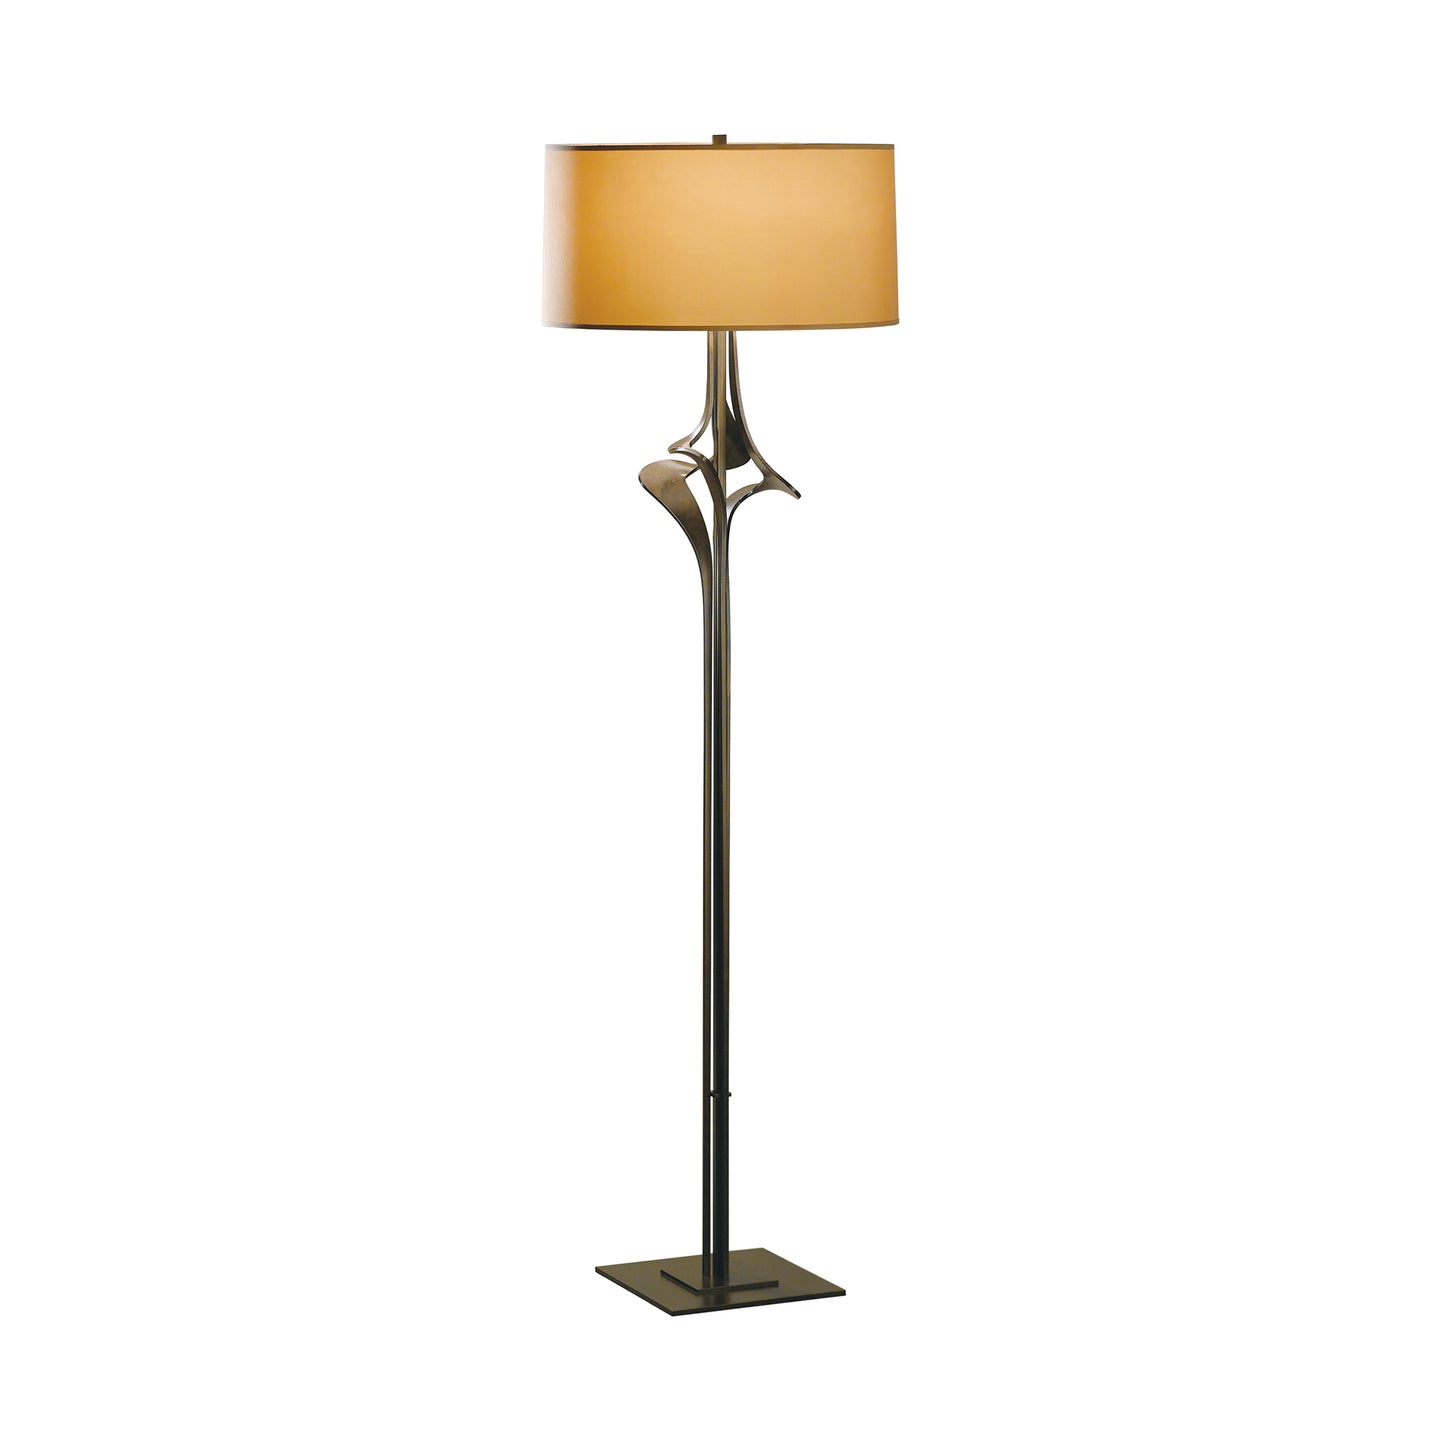 A modern Hubbardton Forge Antasia Floor Lamp with a slender black base and curving metallic accents, topped by a wide, cylindrical beige shade. The design suggests elegance and simplicity.